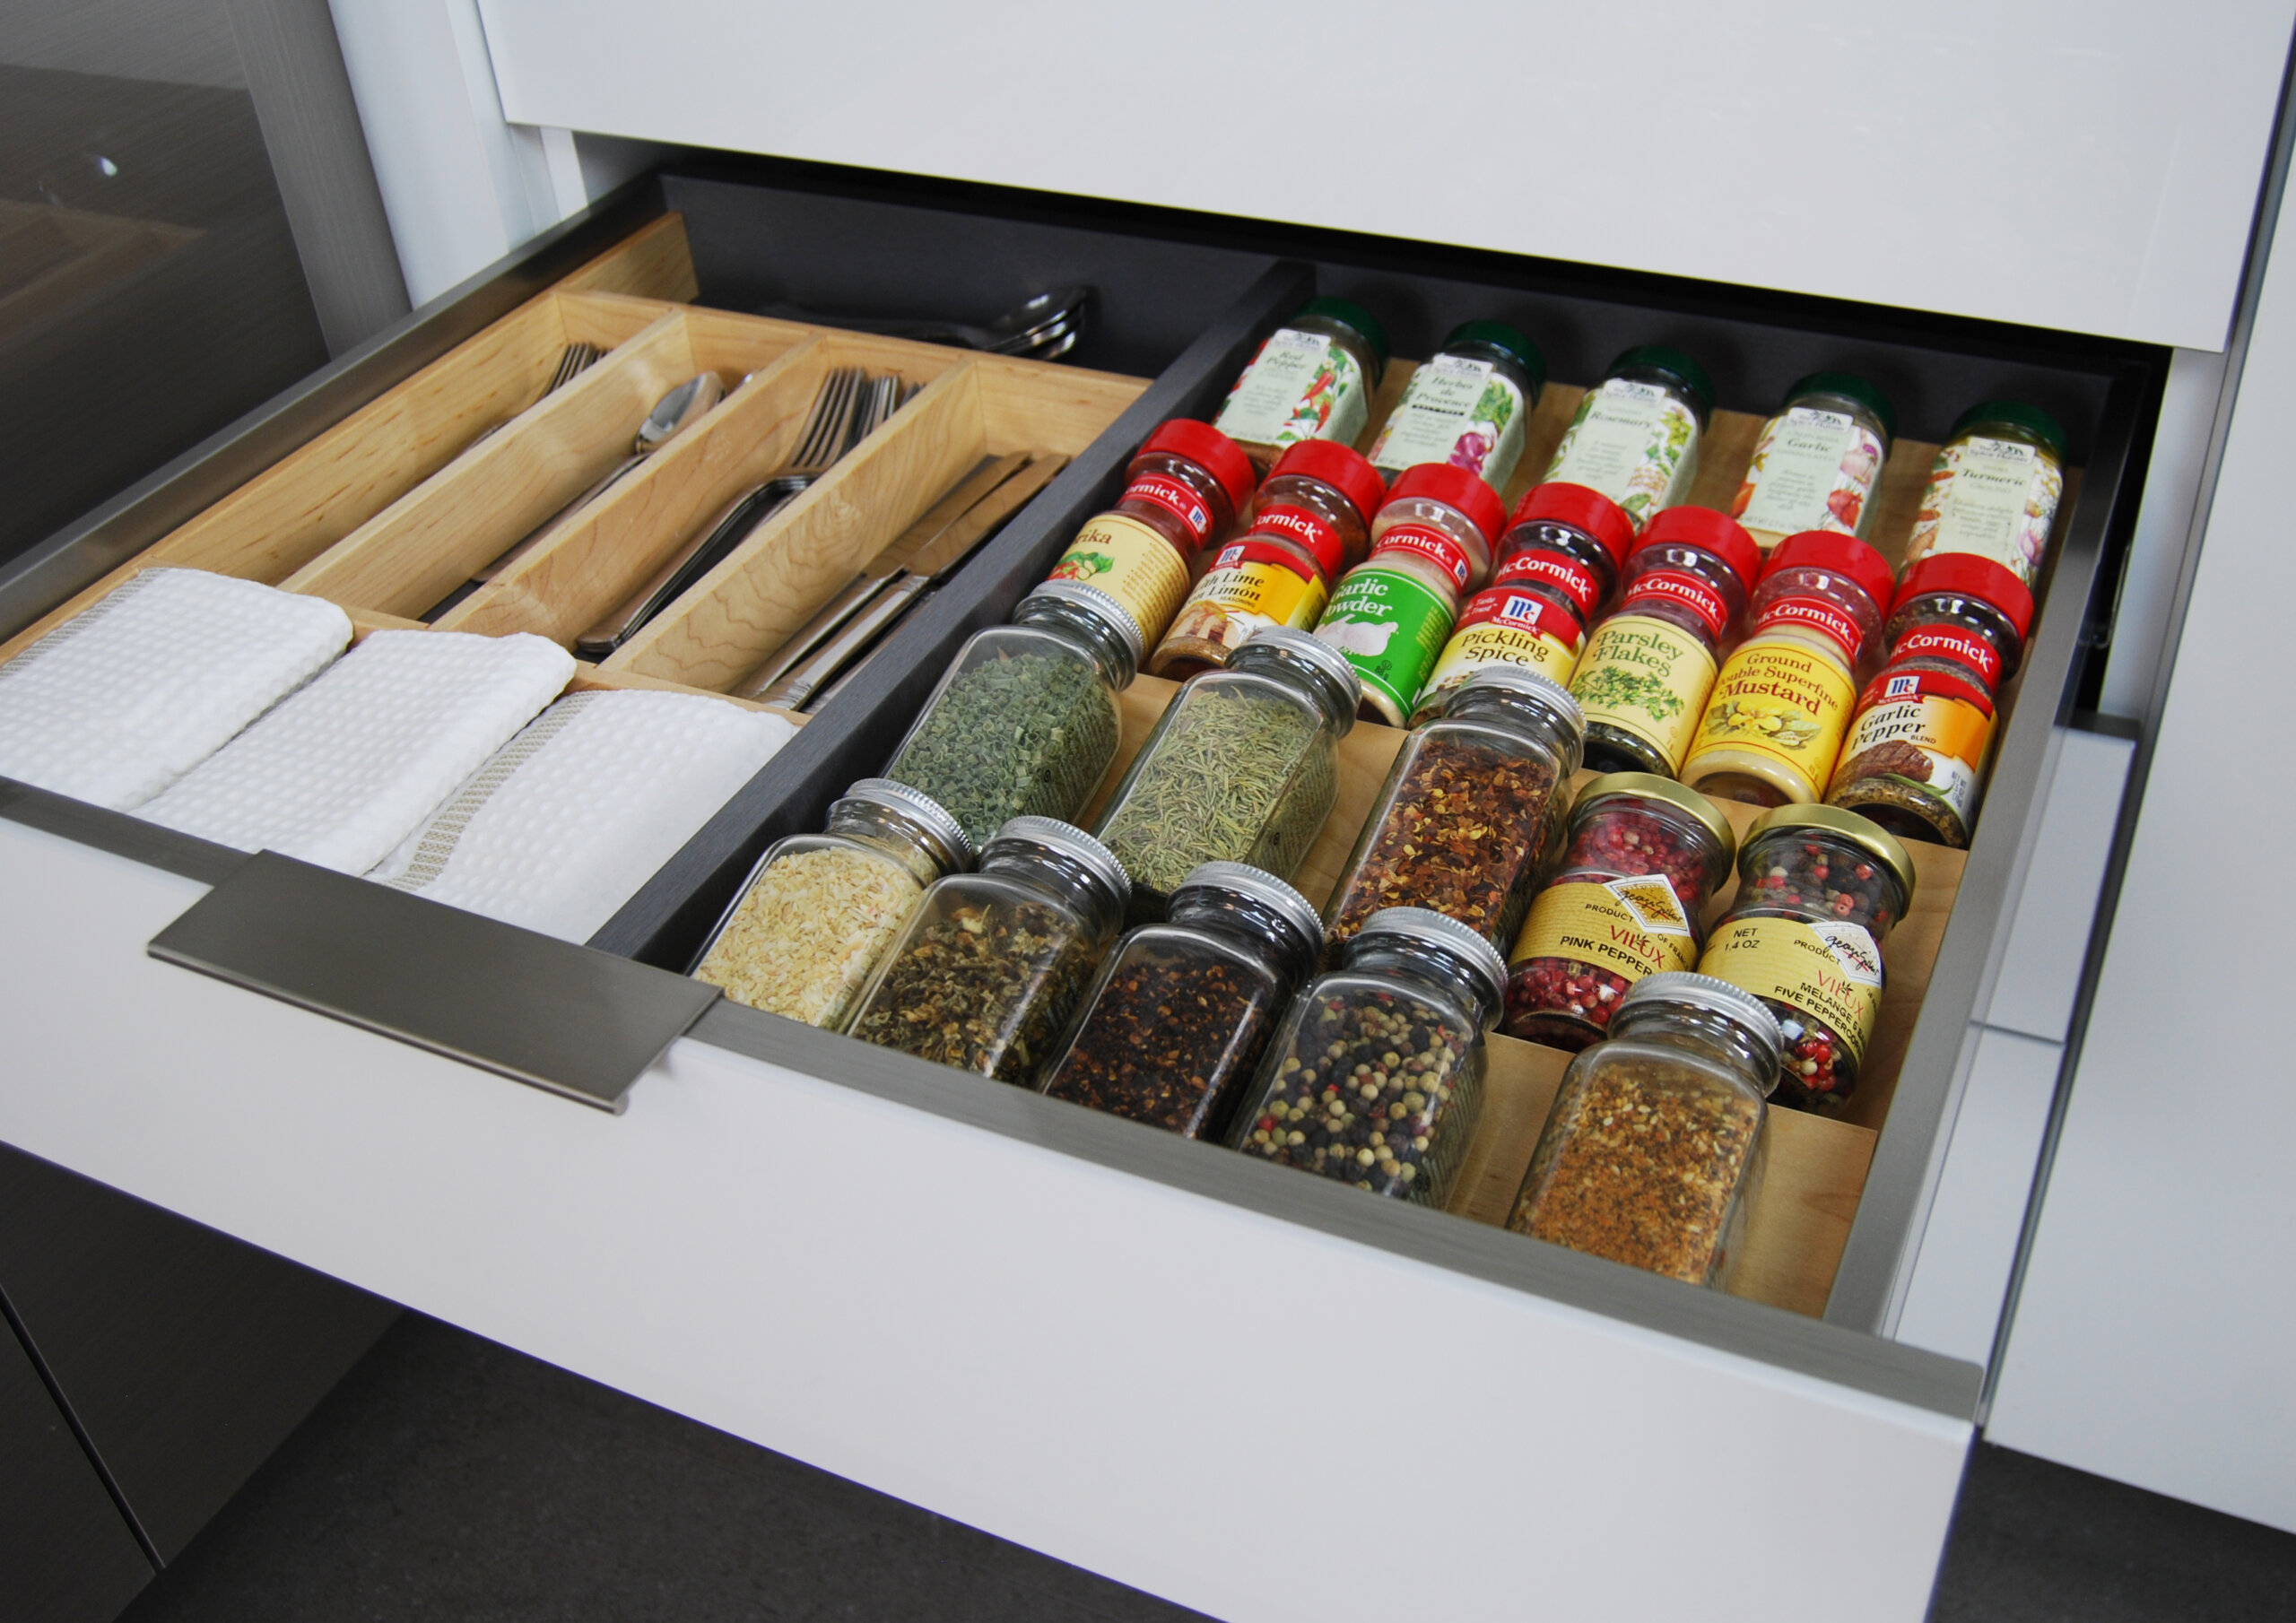 Wood Accessories in a Stainless Steel Drawer